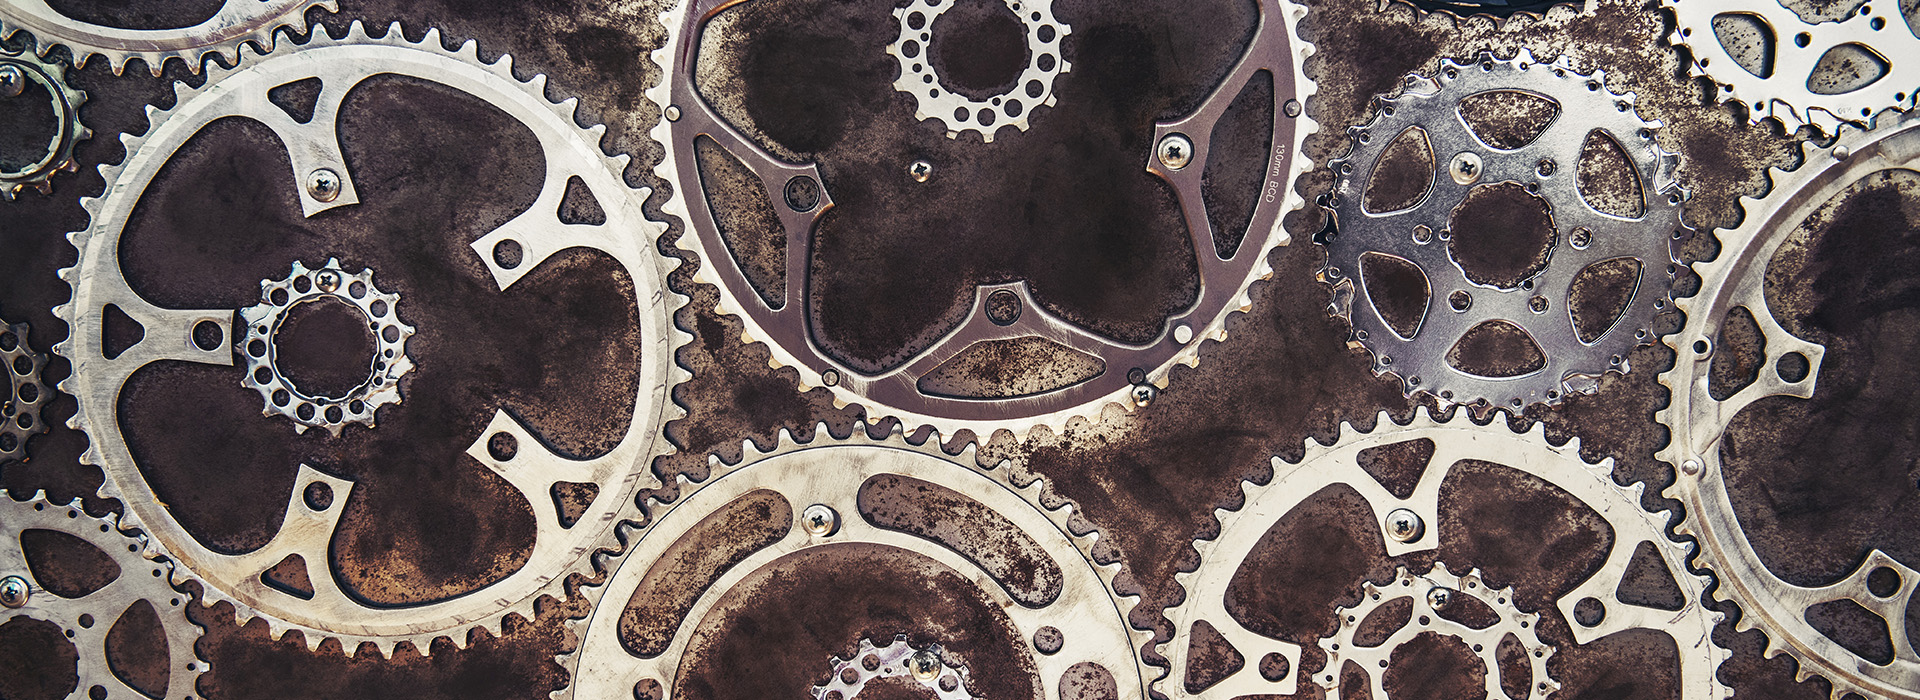 Automation cogs